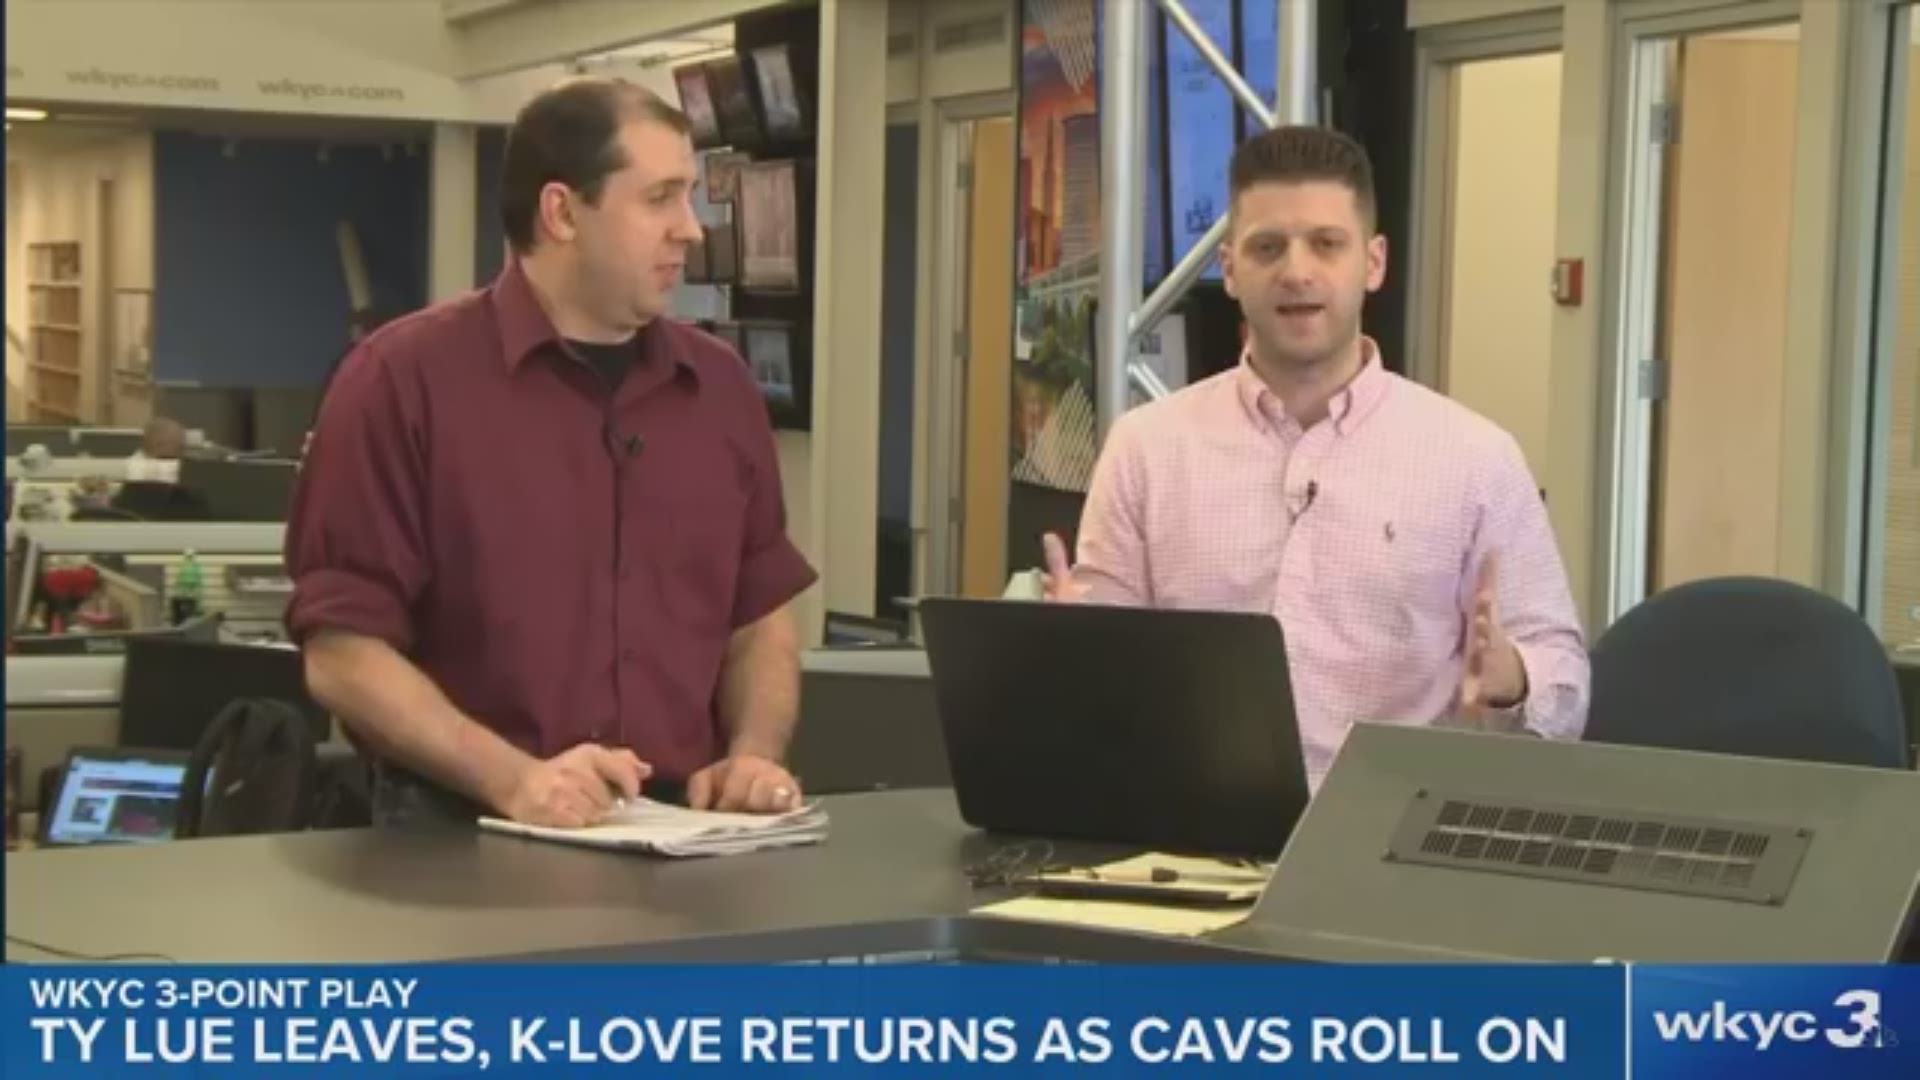 WKYC's Ben Axelrod and Matt Florjancic discuss Kevin Love's return to the Cavs, Tyronn Lue's leave of absence and WWE clearing Daniel Bryan to wrestle.